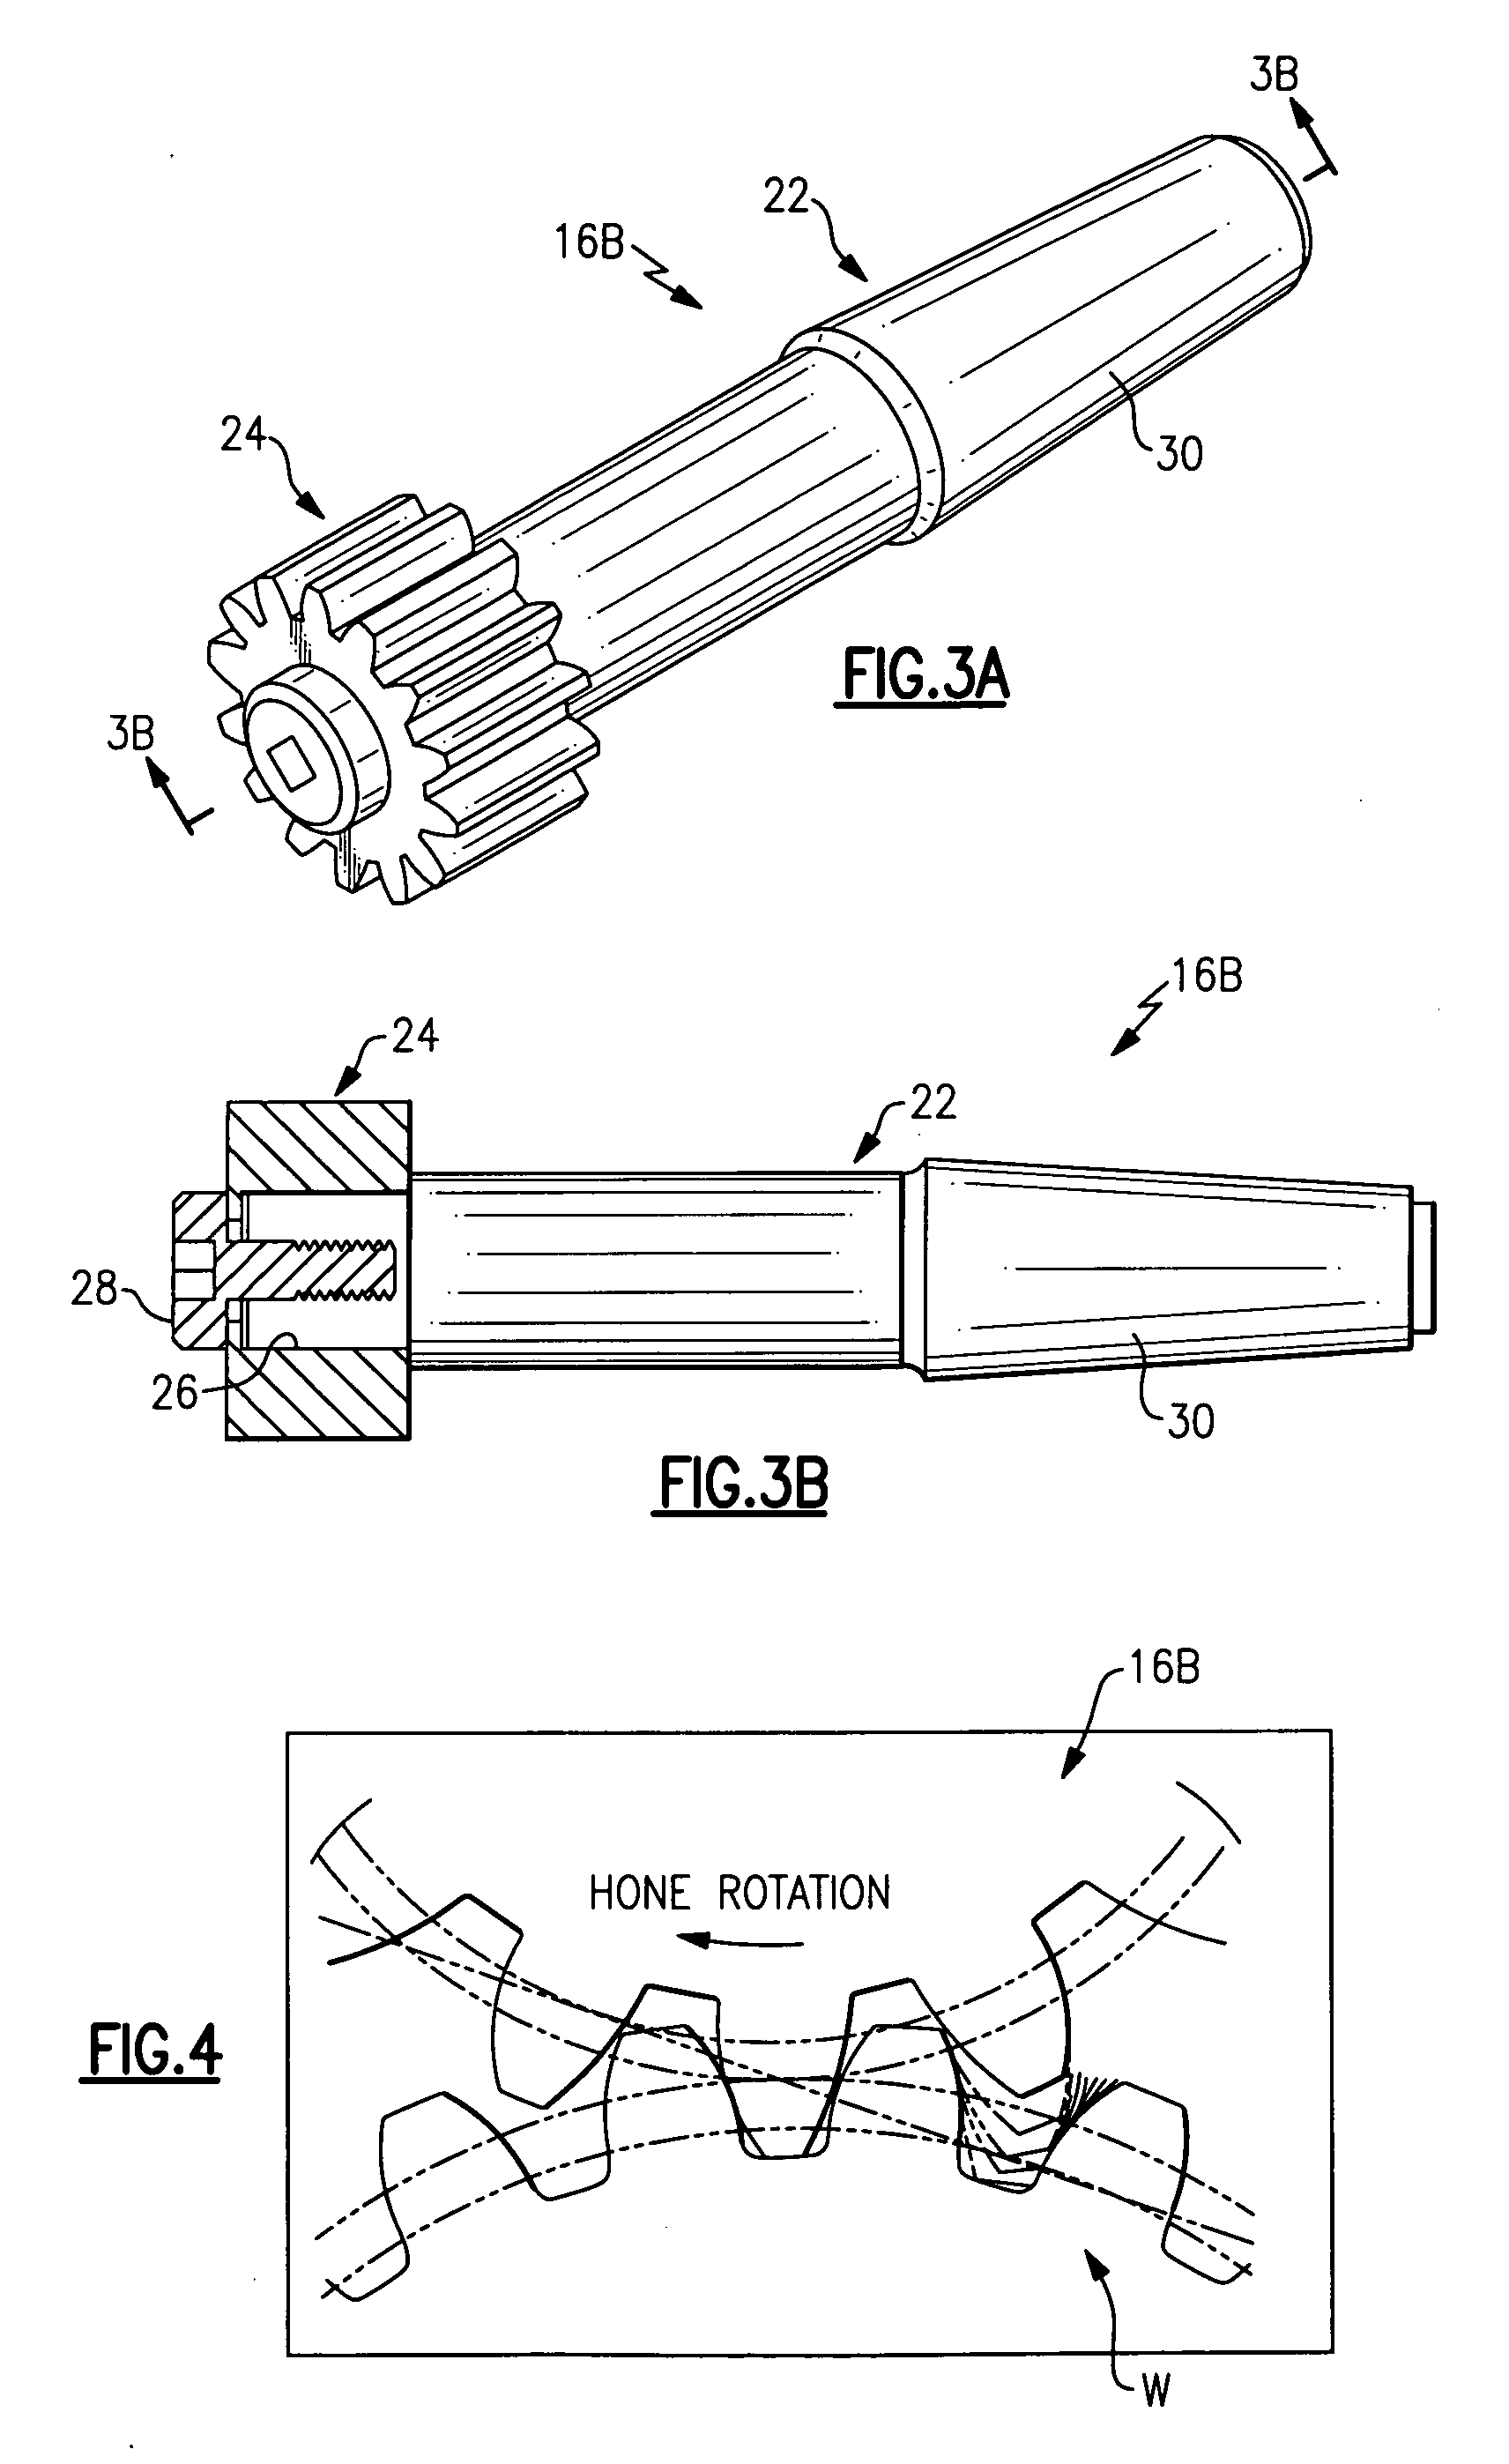 System and method for precision machining of high hardness gear teeth and splines